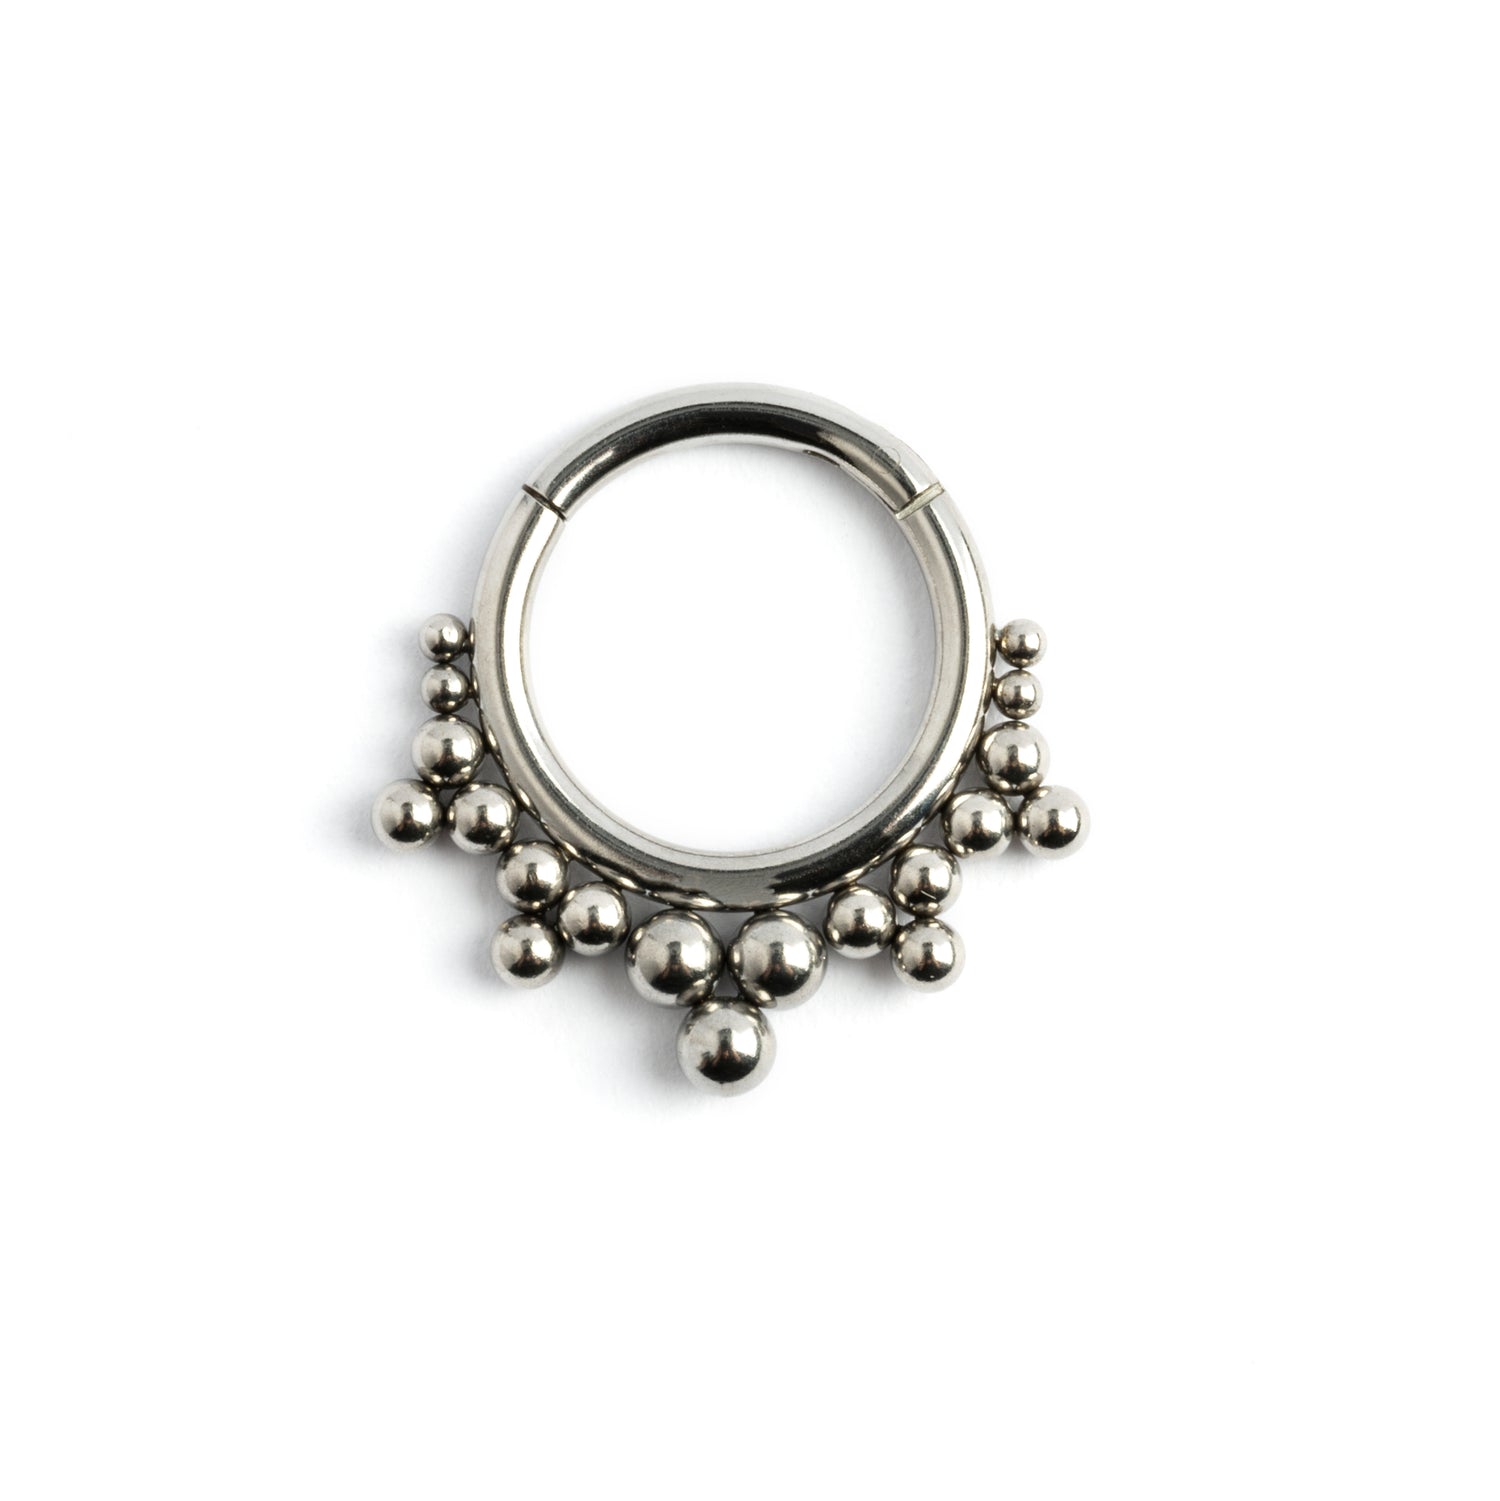 Layla surgical steel septum clicker ring frontal view